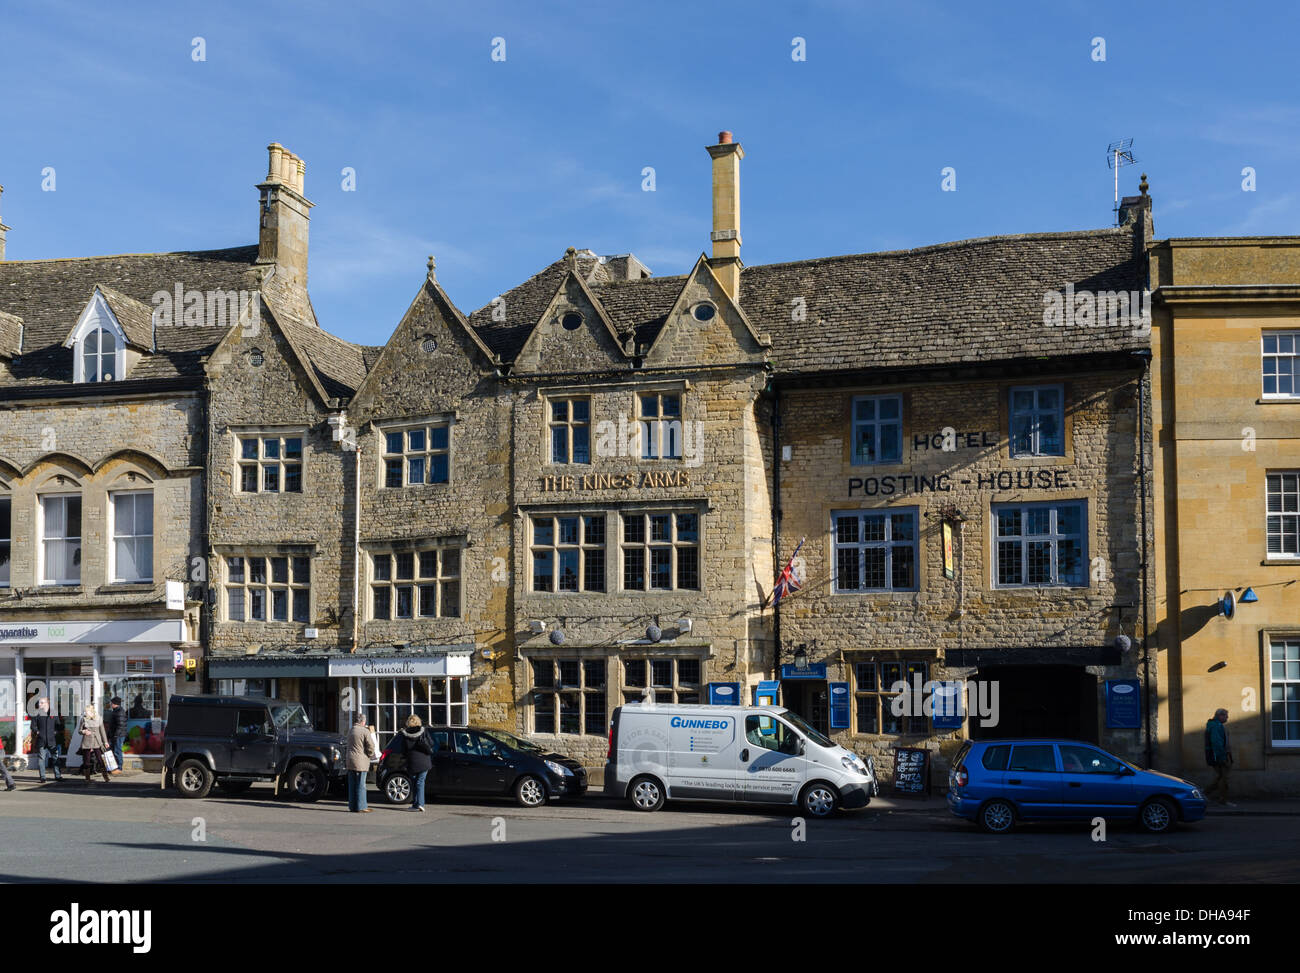 The Kings Arms Hotel and old Posting House in the Cotswold town of Stow-on-the-Wold Stock Photo